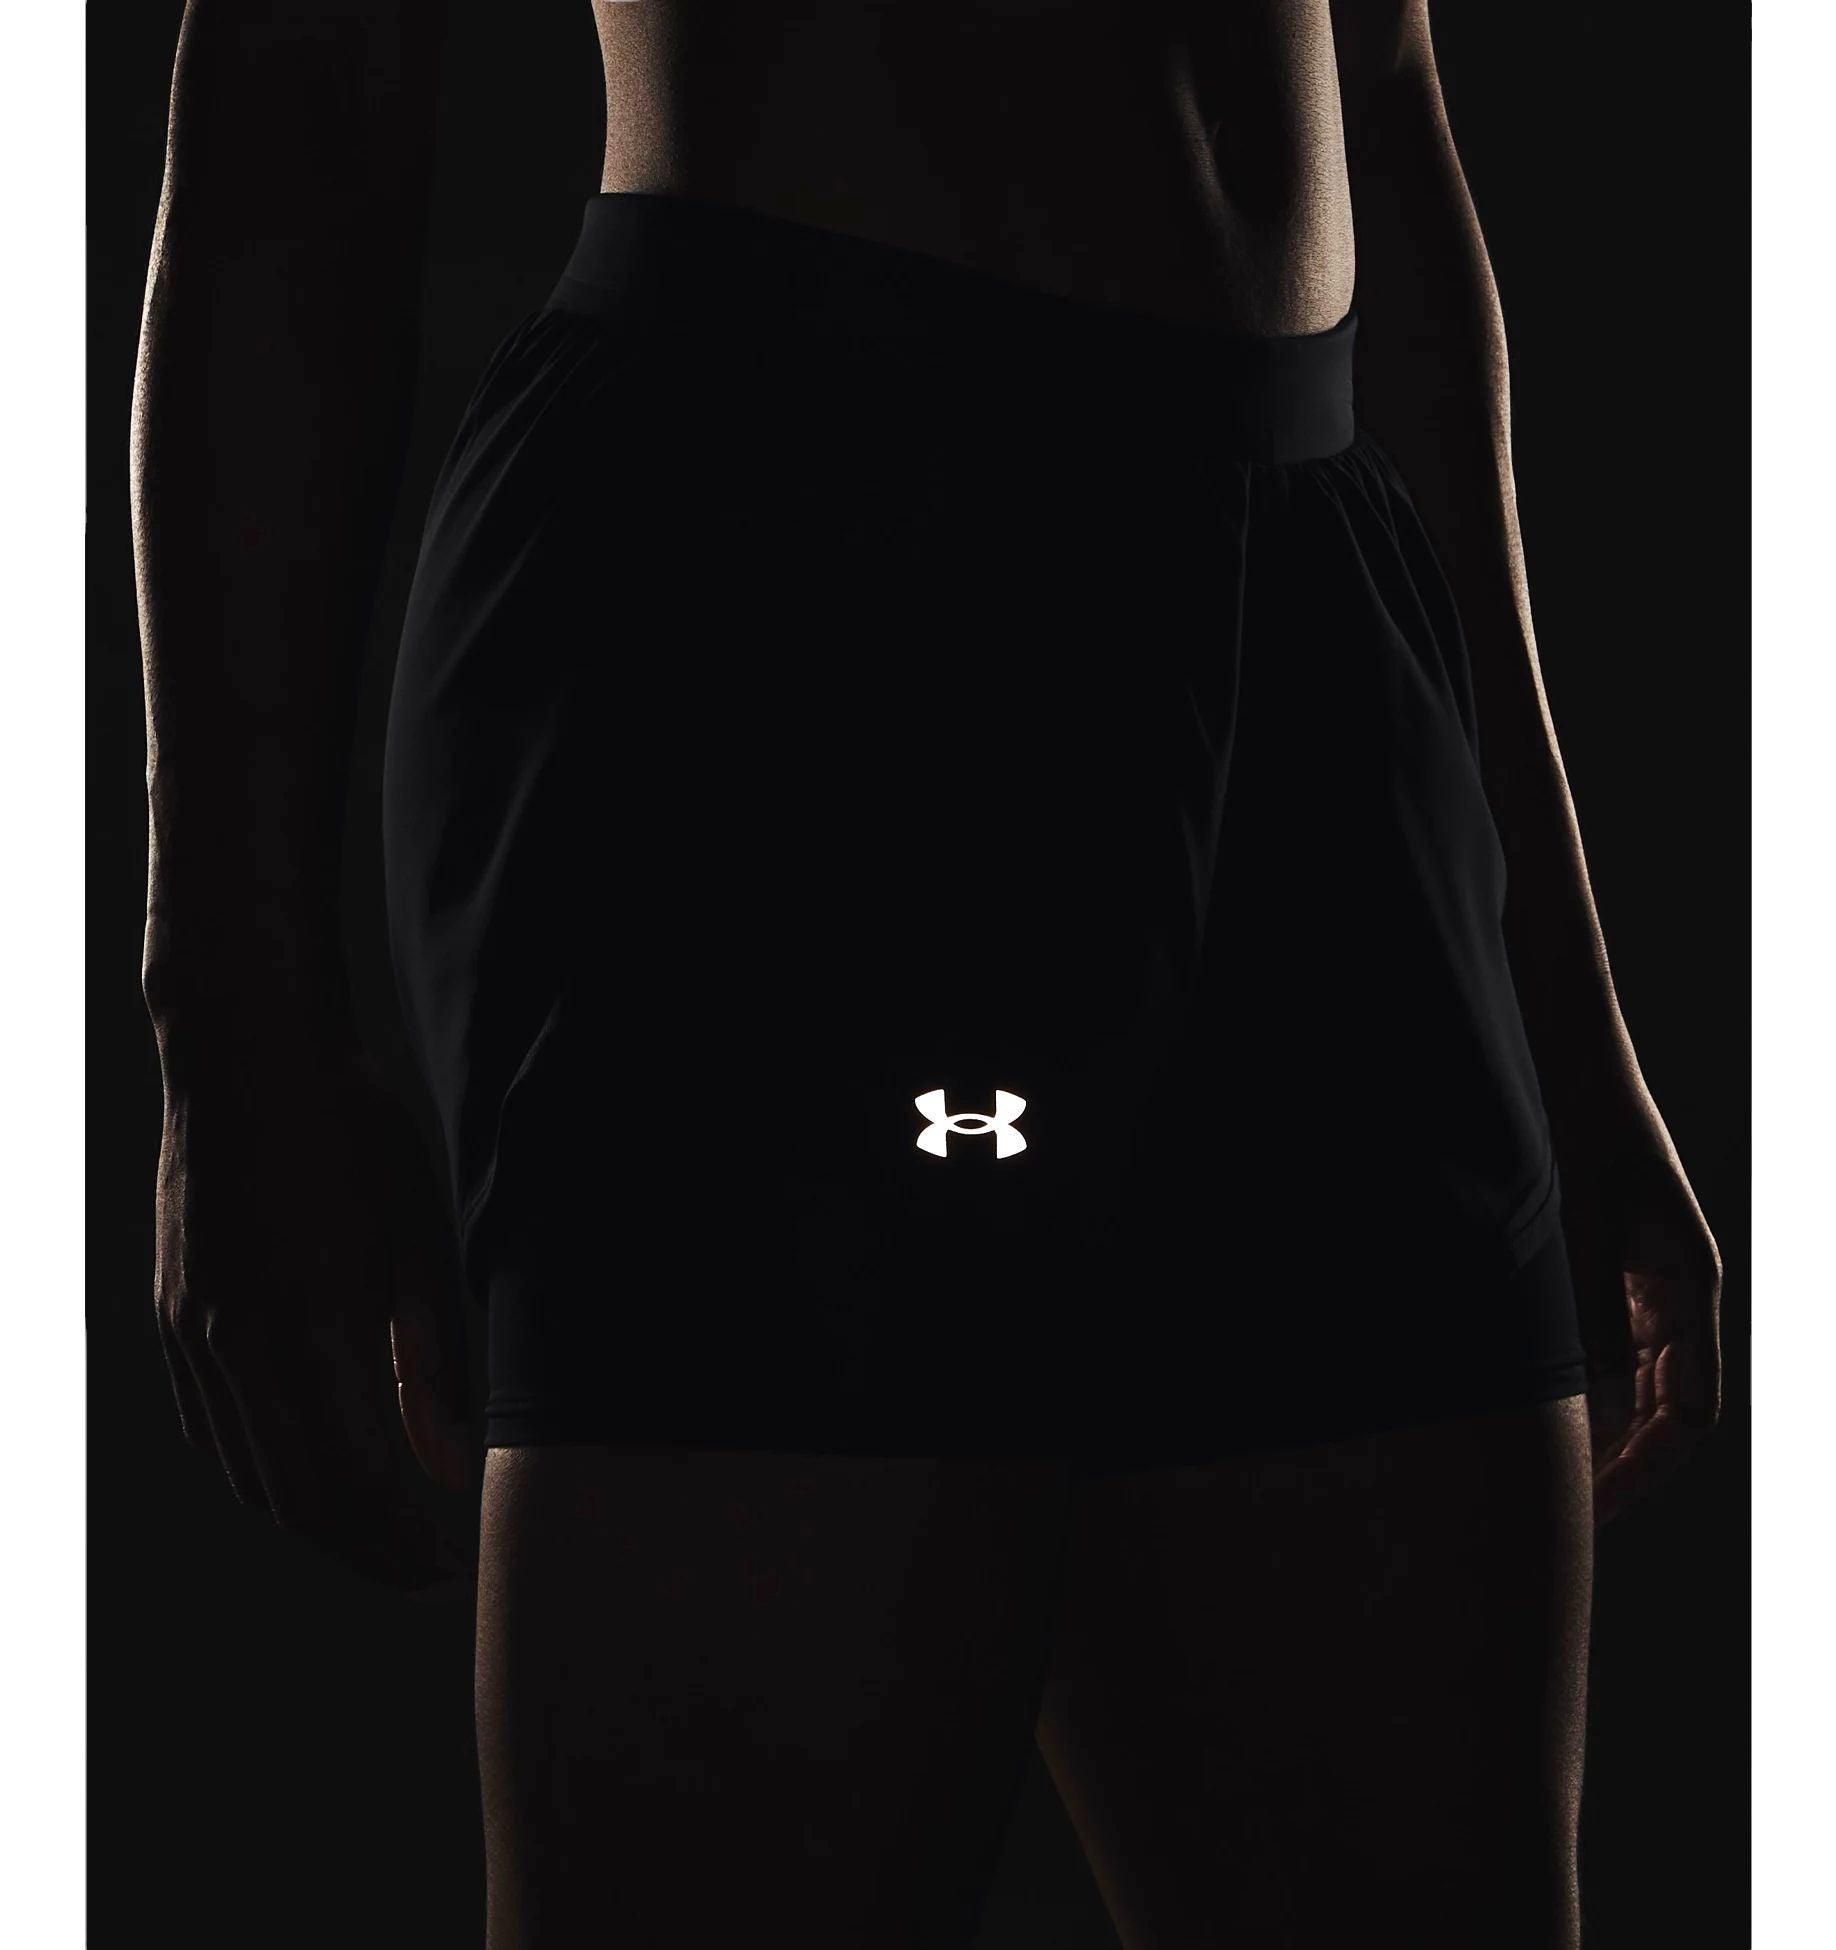 Under Armour | Pantaloncini Fly-By Elite 2-in-1 Donna Black/Reflective - Fabbrica Ski Sises